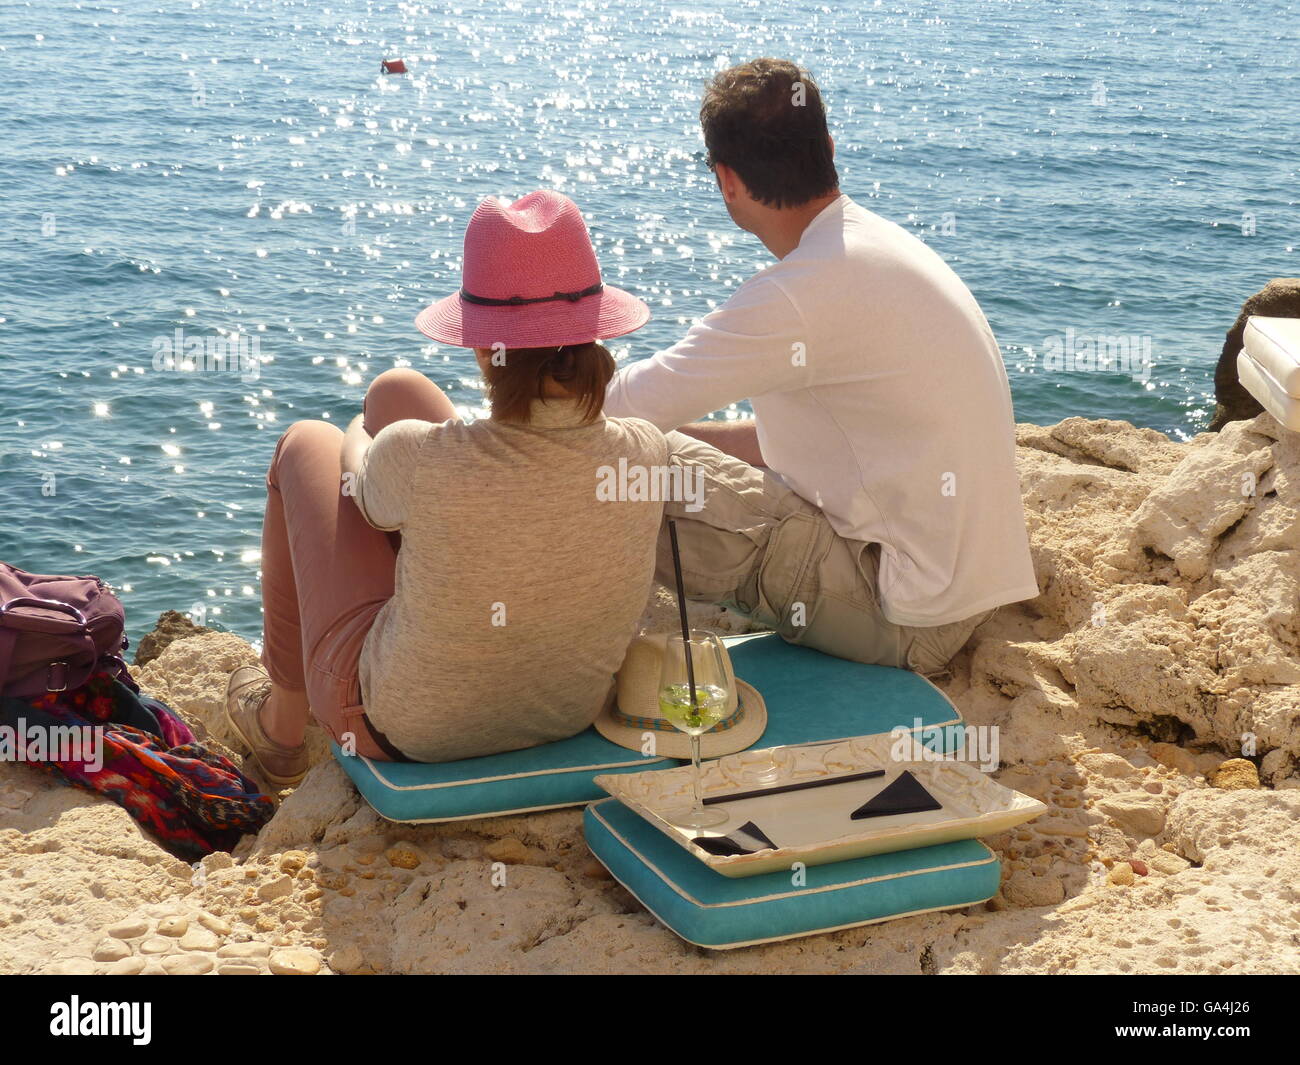 young couple,romance,leisure,daytrippers,nature,water,Rovinj,Croatia,Adriatic Stock Photo